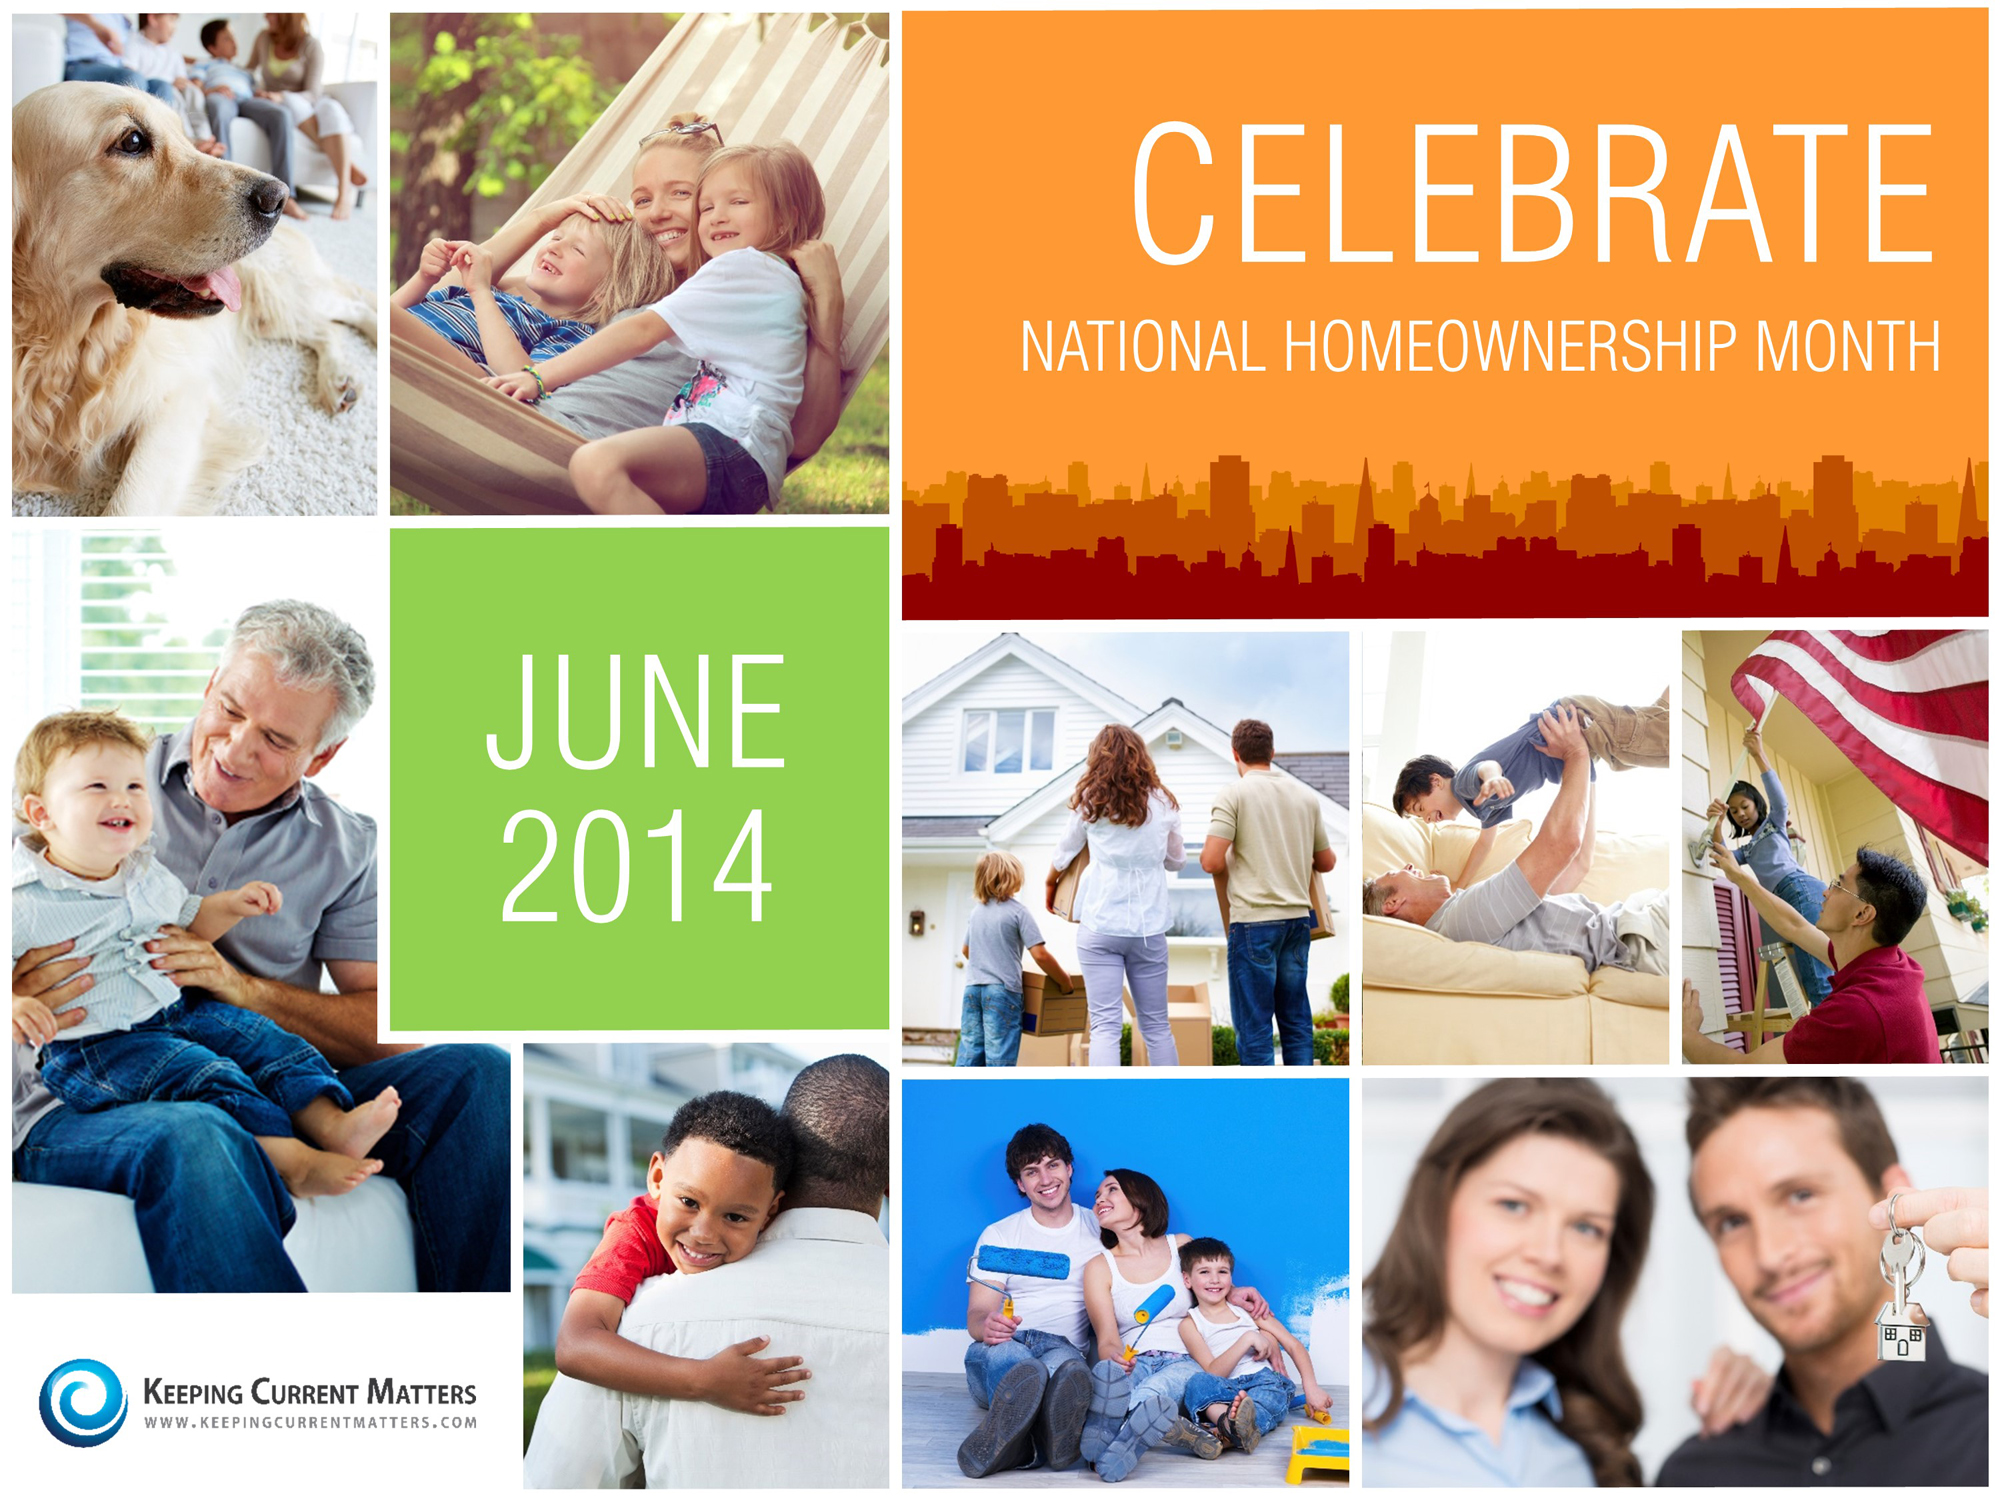 June is National Homeownership Month!